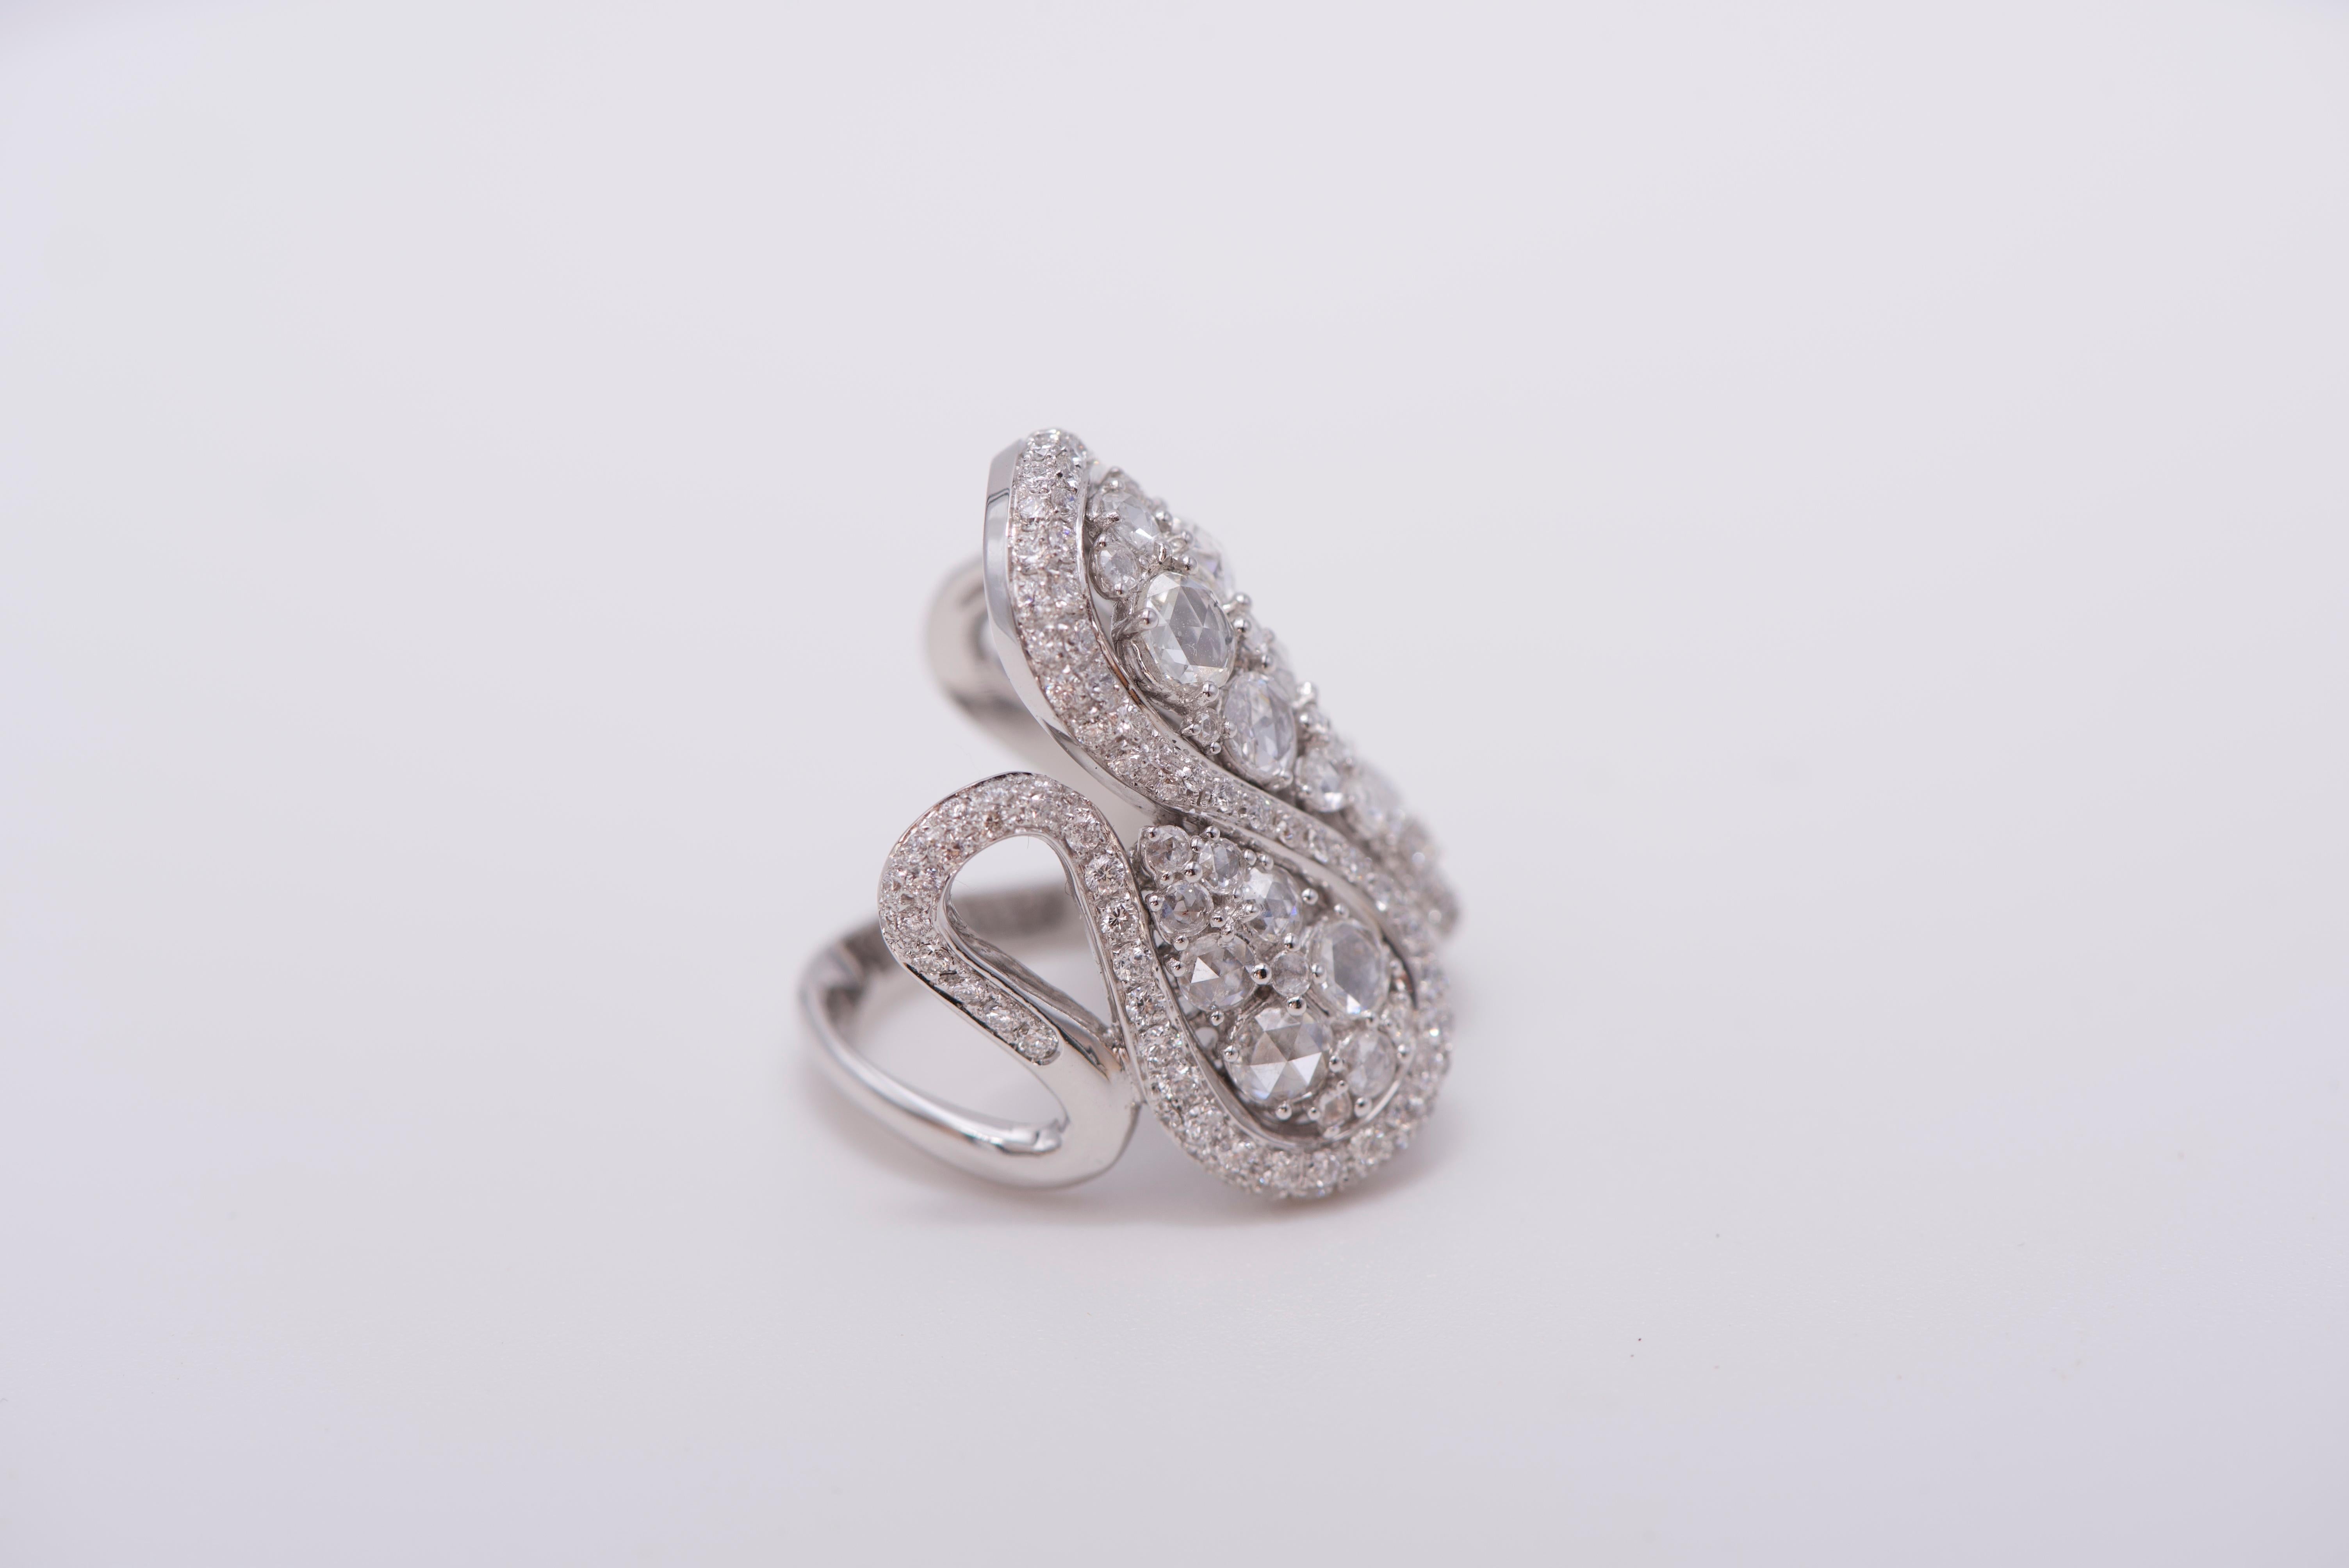 Adamas ring in 18K white gold with approximately 3.36 carats of diamonds throughout the ring. 